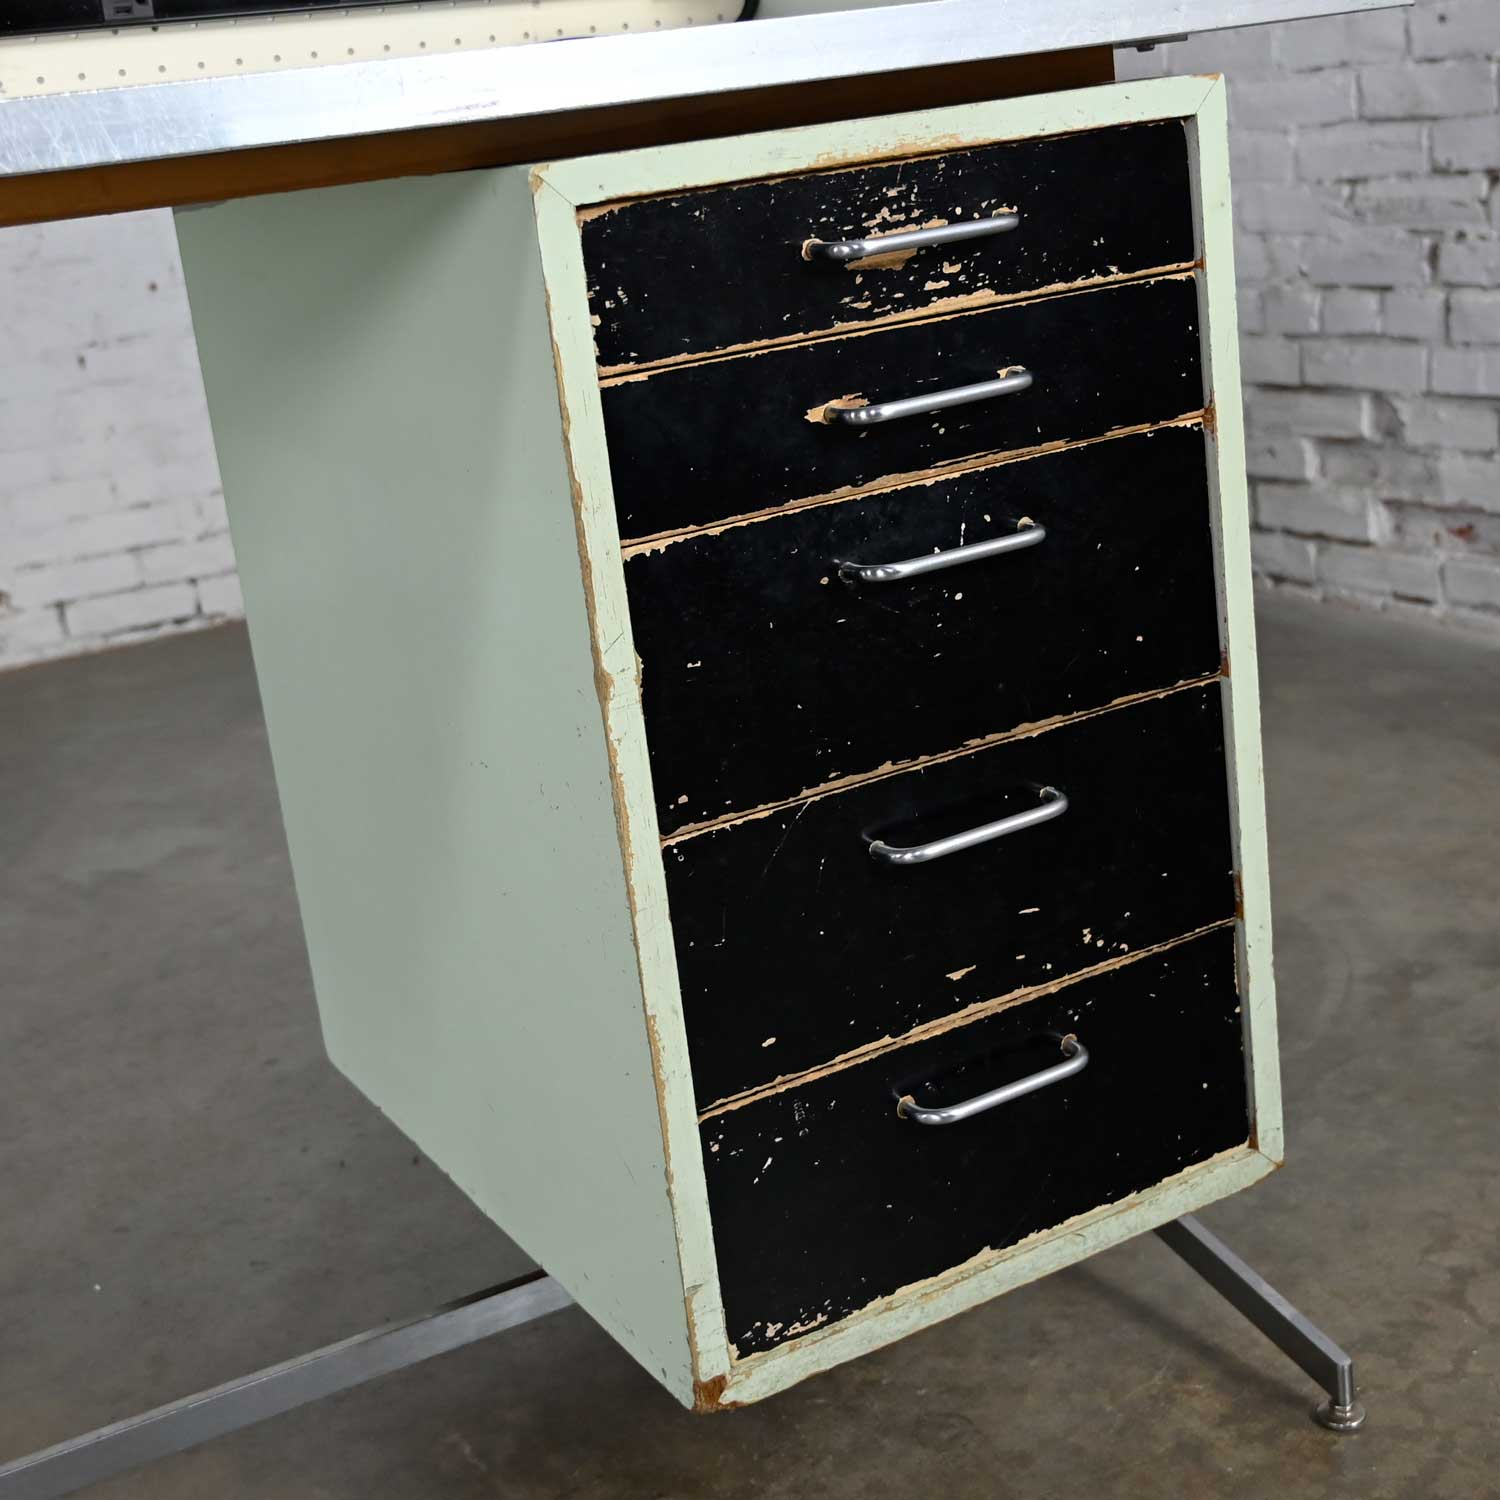 Industrial Mid-Century Modern Distressed Stand Up Desk Worktable by American Optical Consul Furniture Line